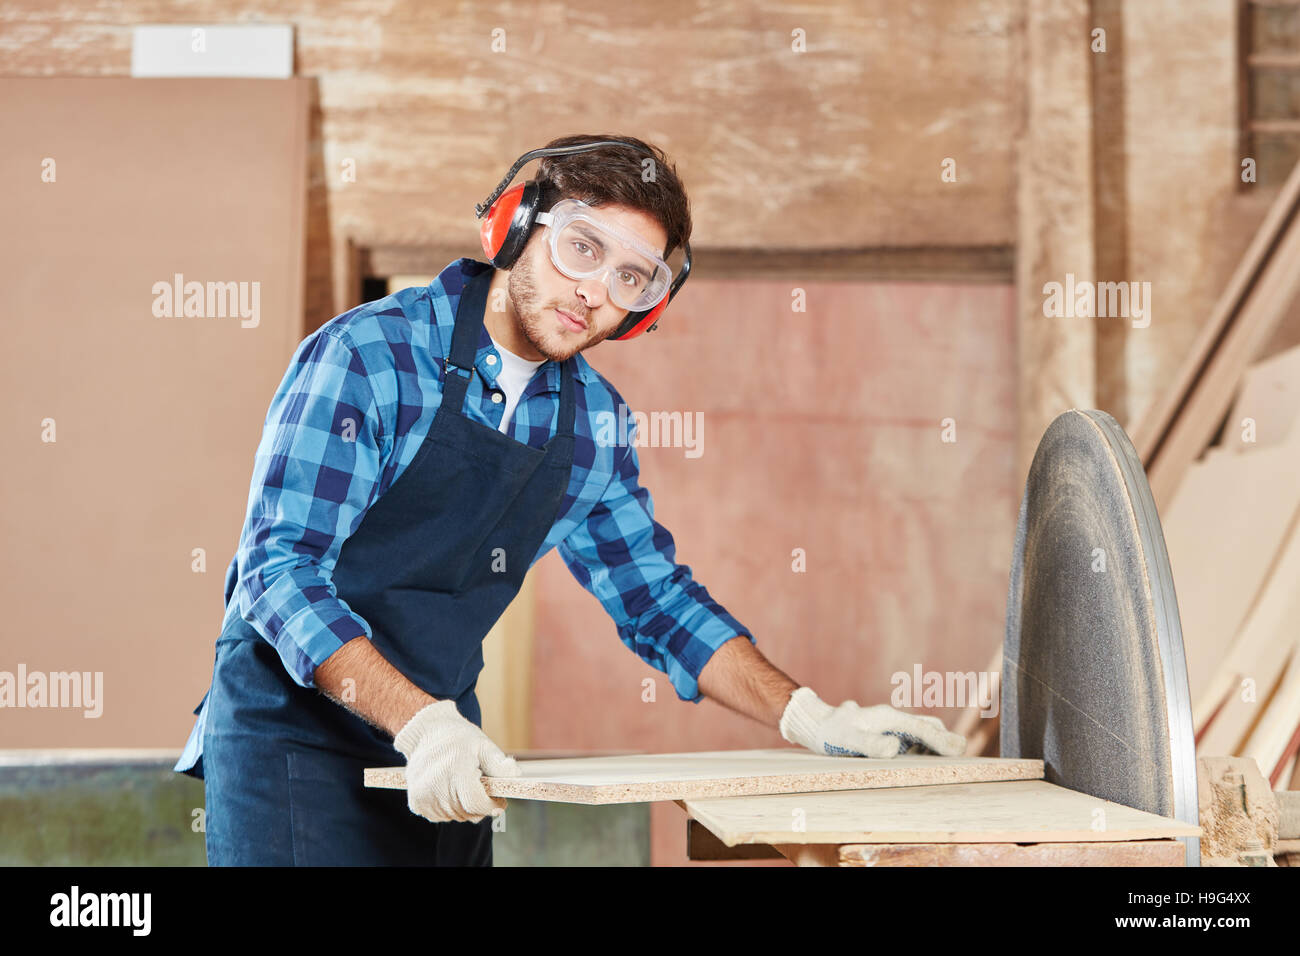 Man working with grind machine at workshop Stock Photo